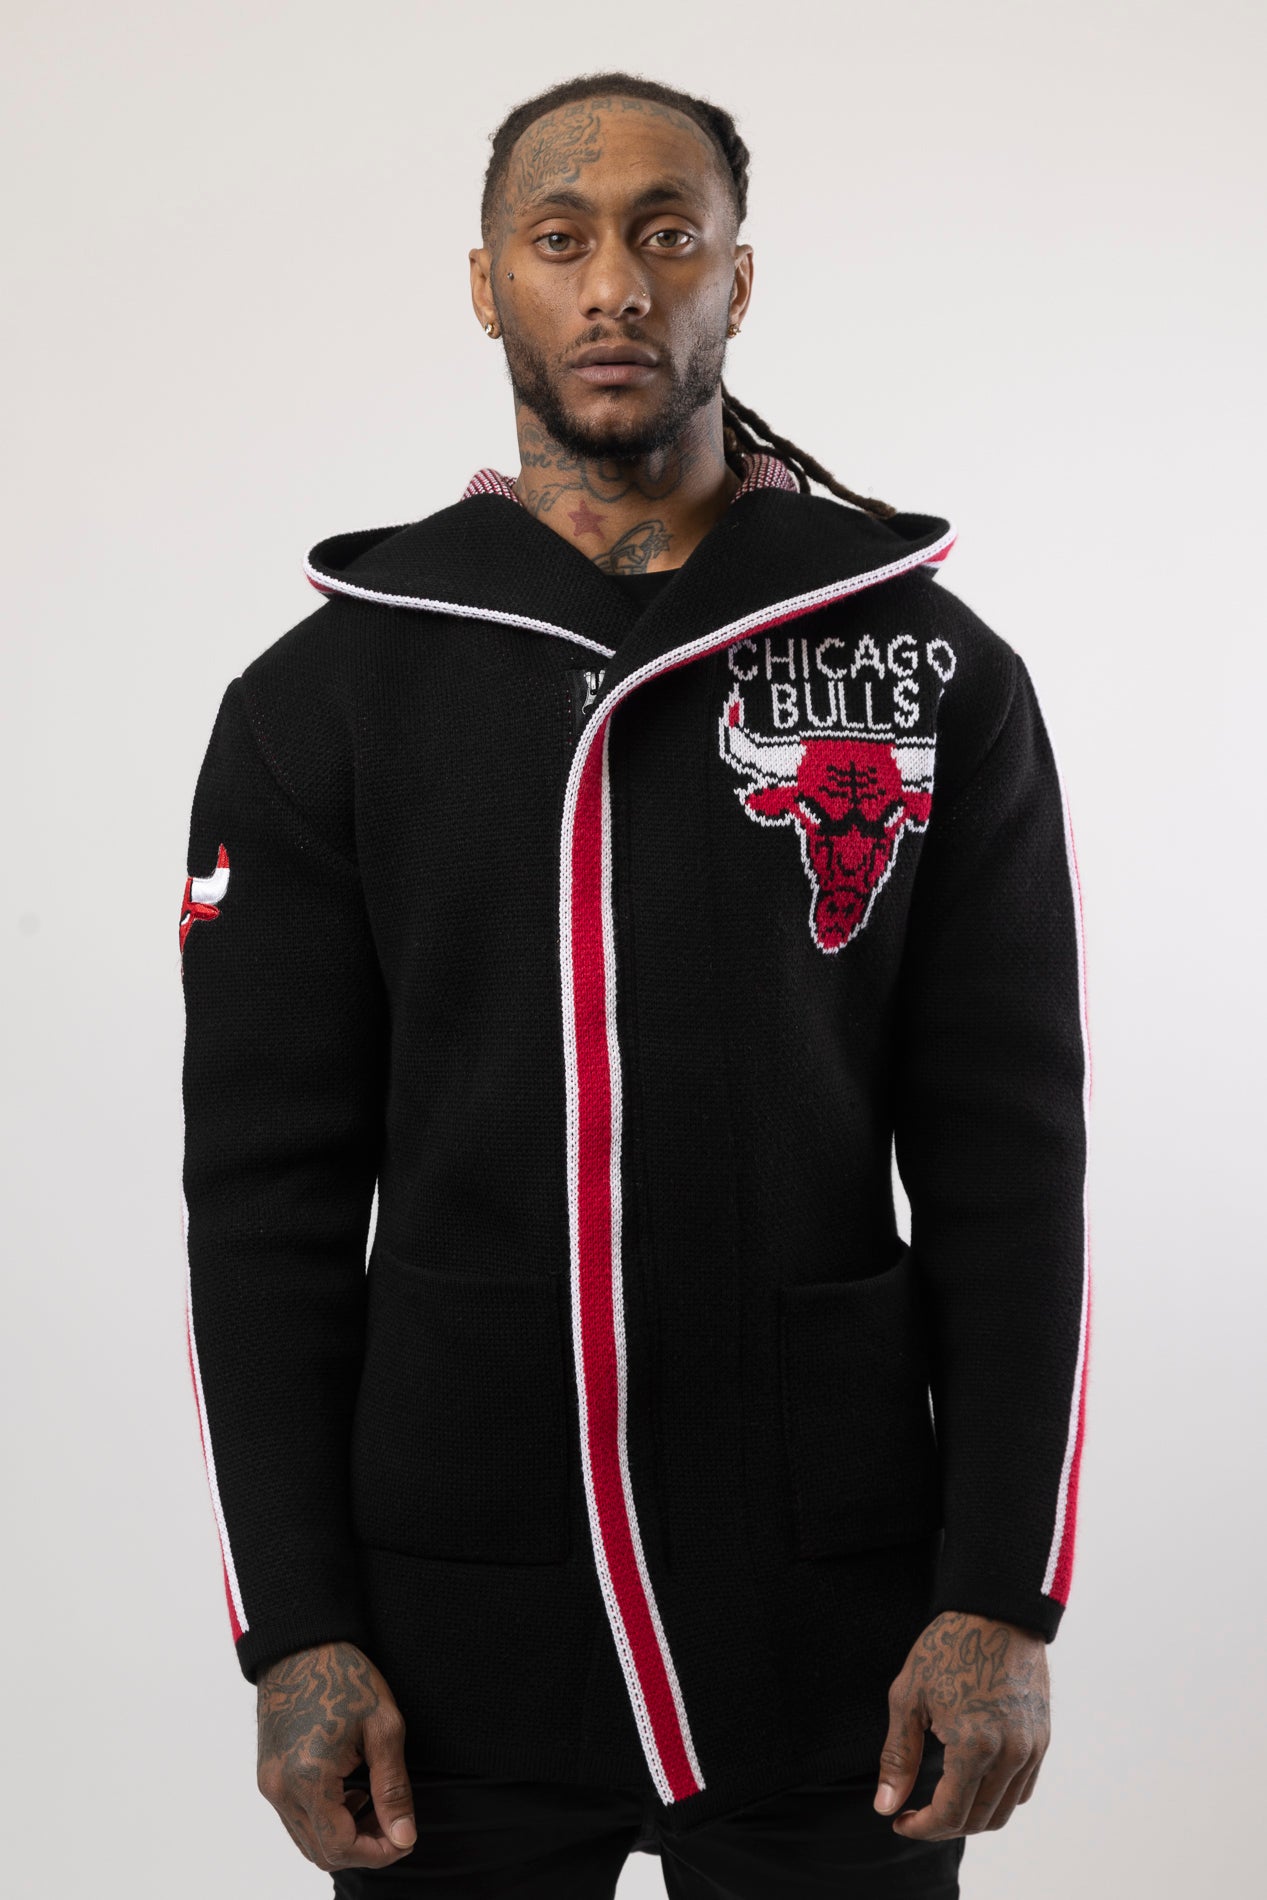 Upgrade your game day look with this Chicago Bulls Cardigan Sweater. This cozy jacket is designed with a stylish three-quarter length and boasts bold team branding on the front, back, and sleeve. Complete with a full-zip closure, attached hood, and front pockets, this knit sweater offers both comfort and style.